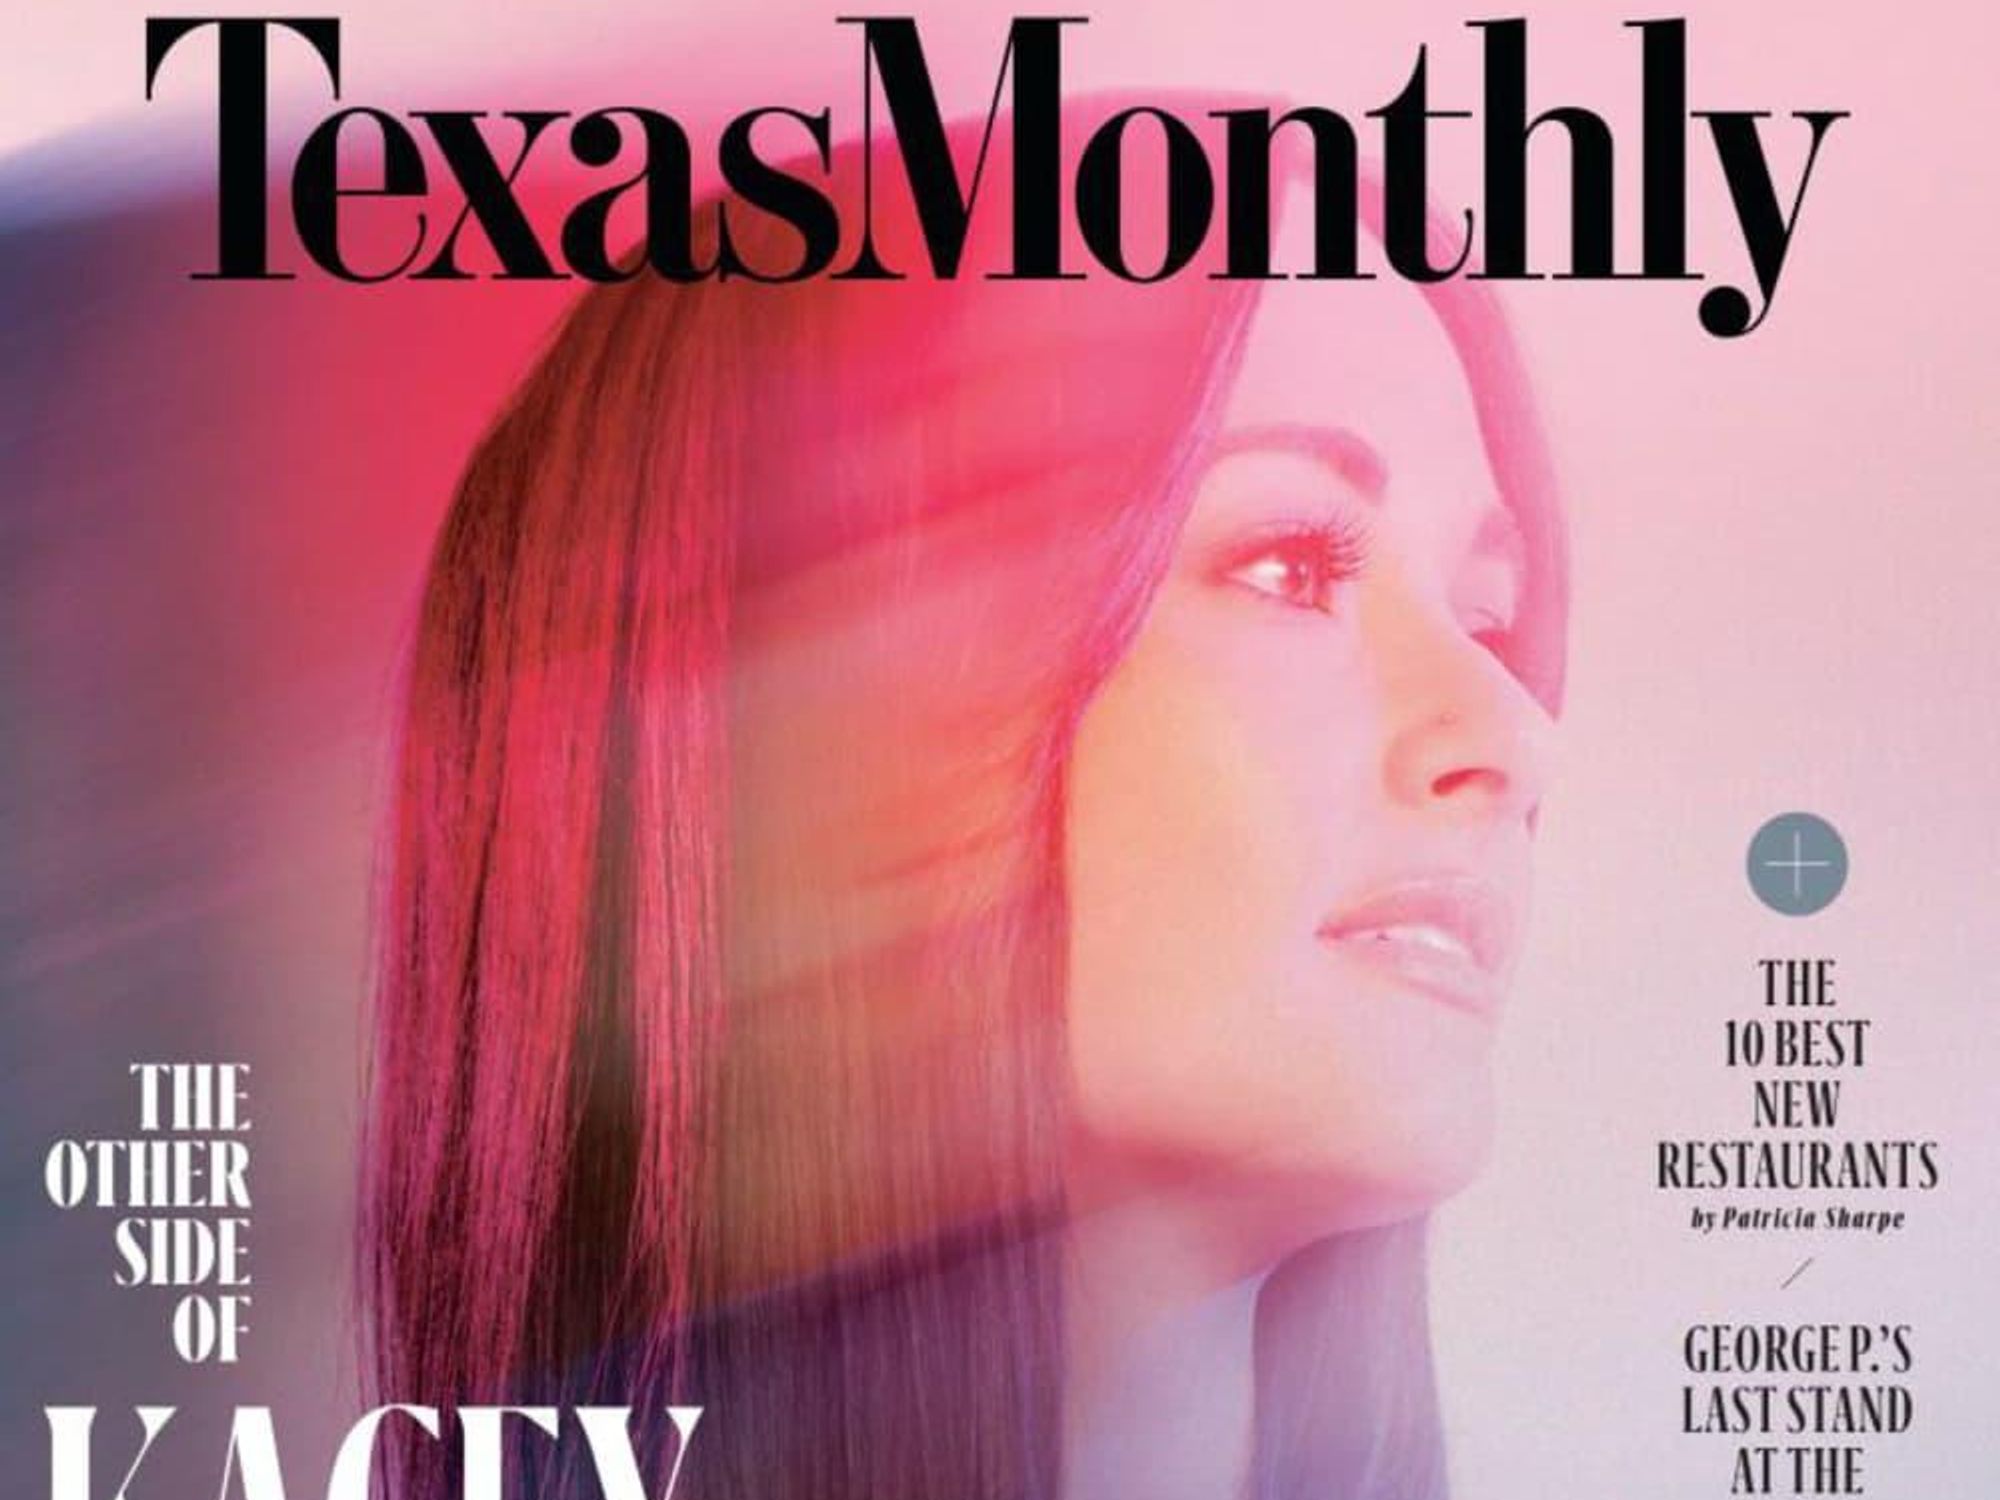 Texas Monthly March 2018 kacey musgraves